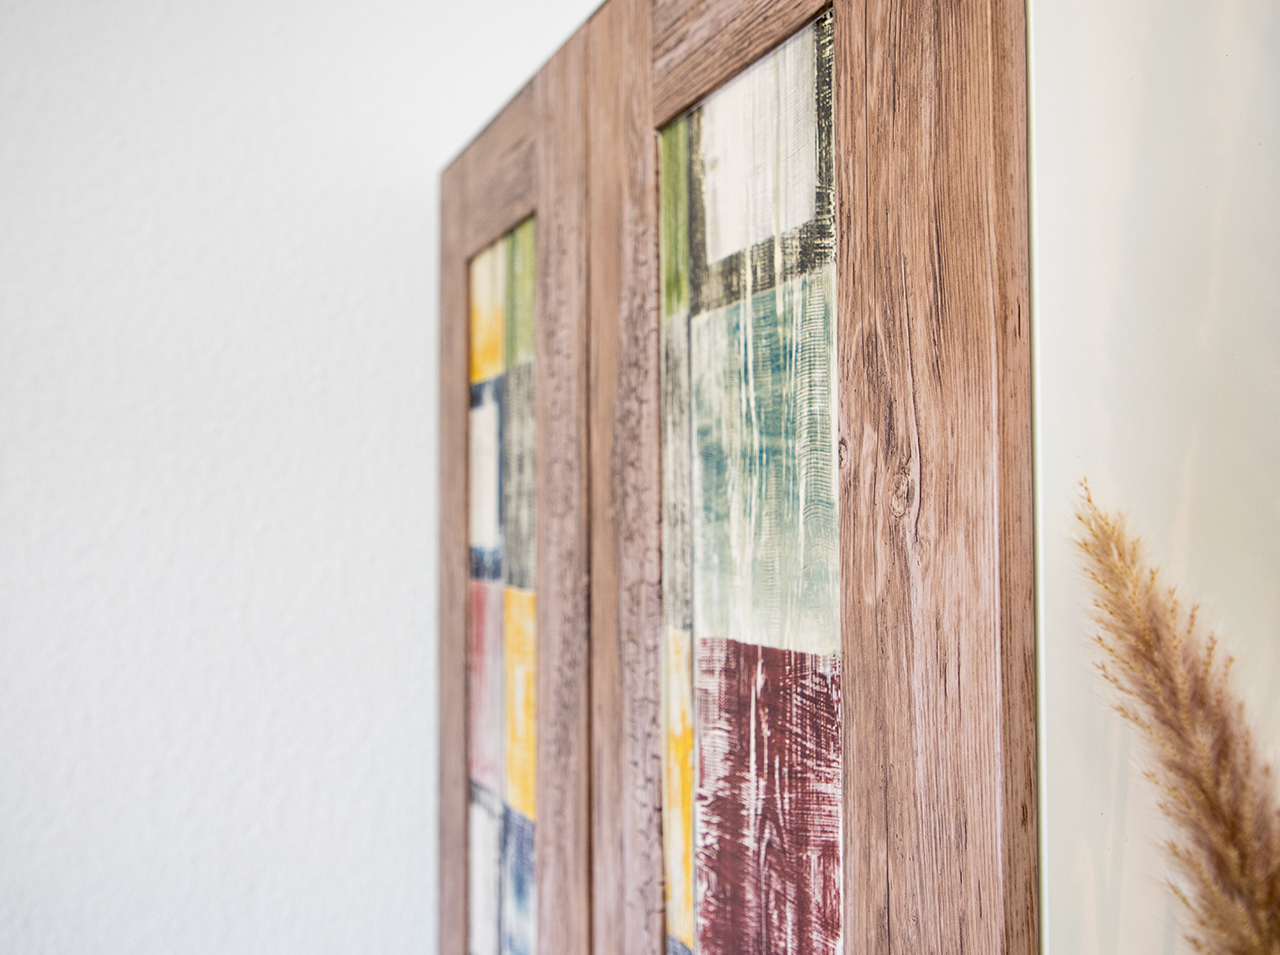 Doors of closet pasted with adhesive foils in colorful vintage look and wood look similar to a beach house.